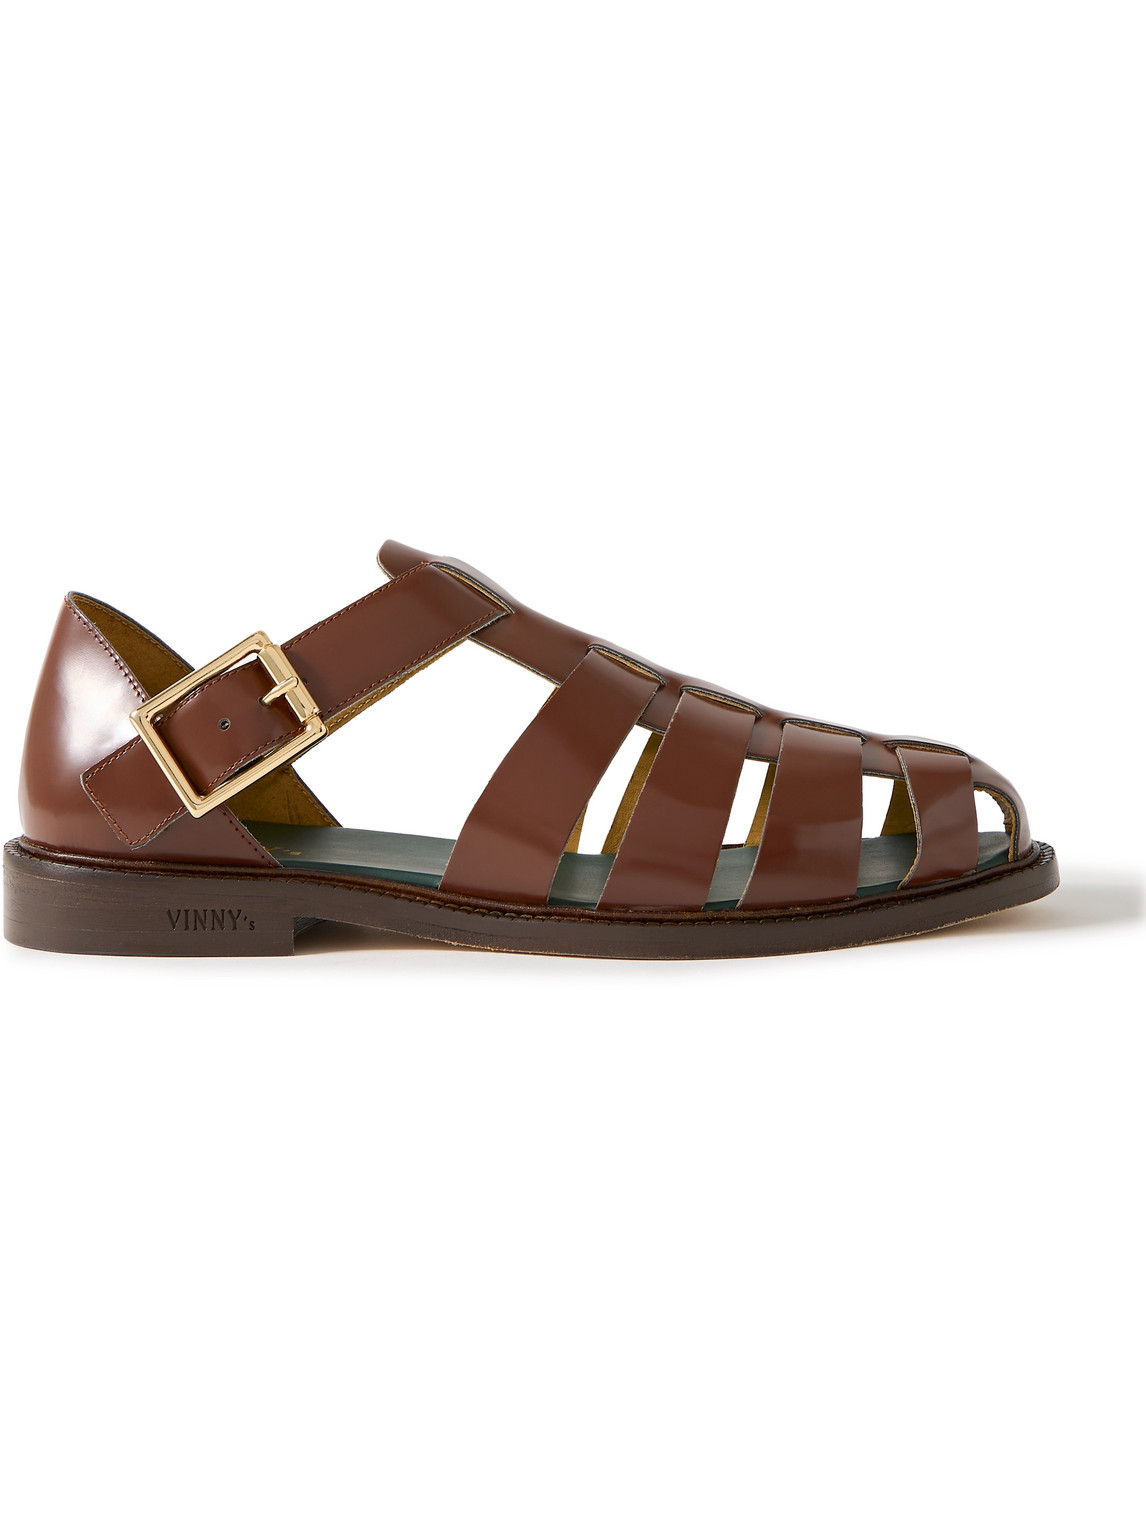 Glossed-Leather Sandals